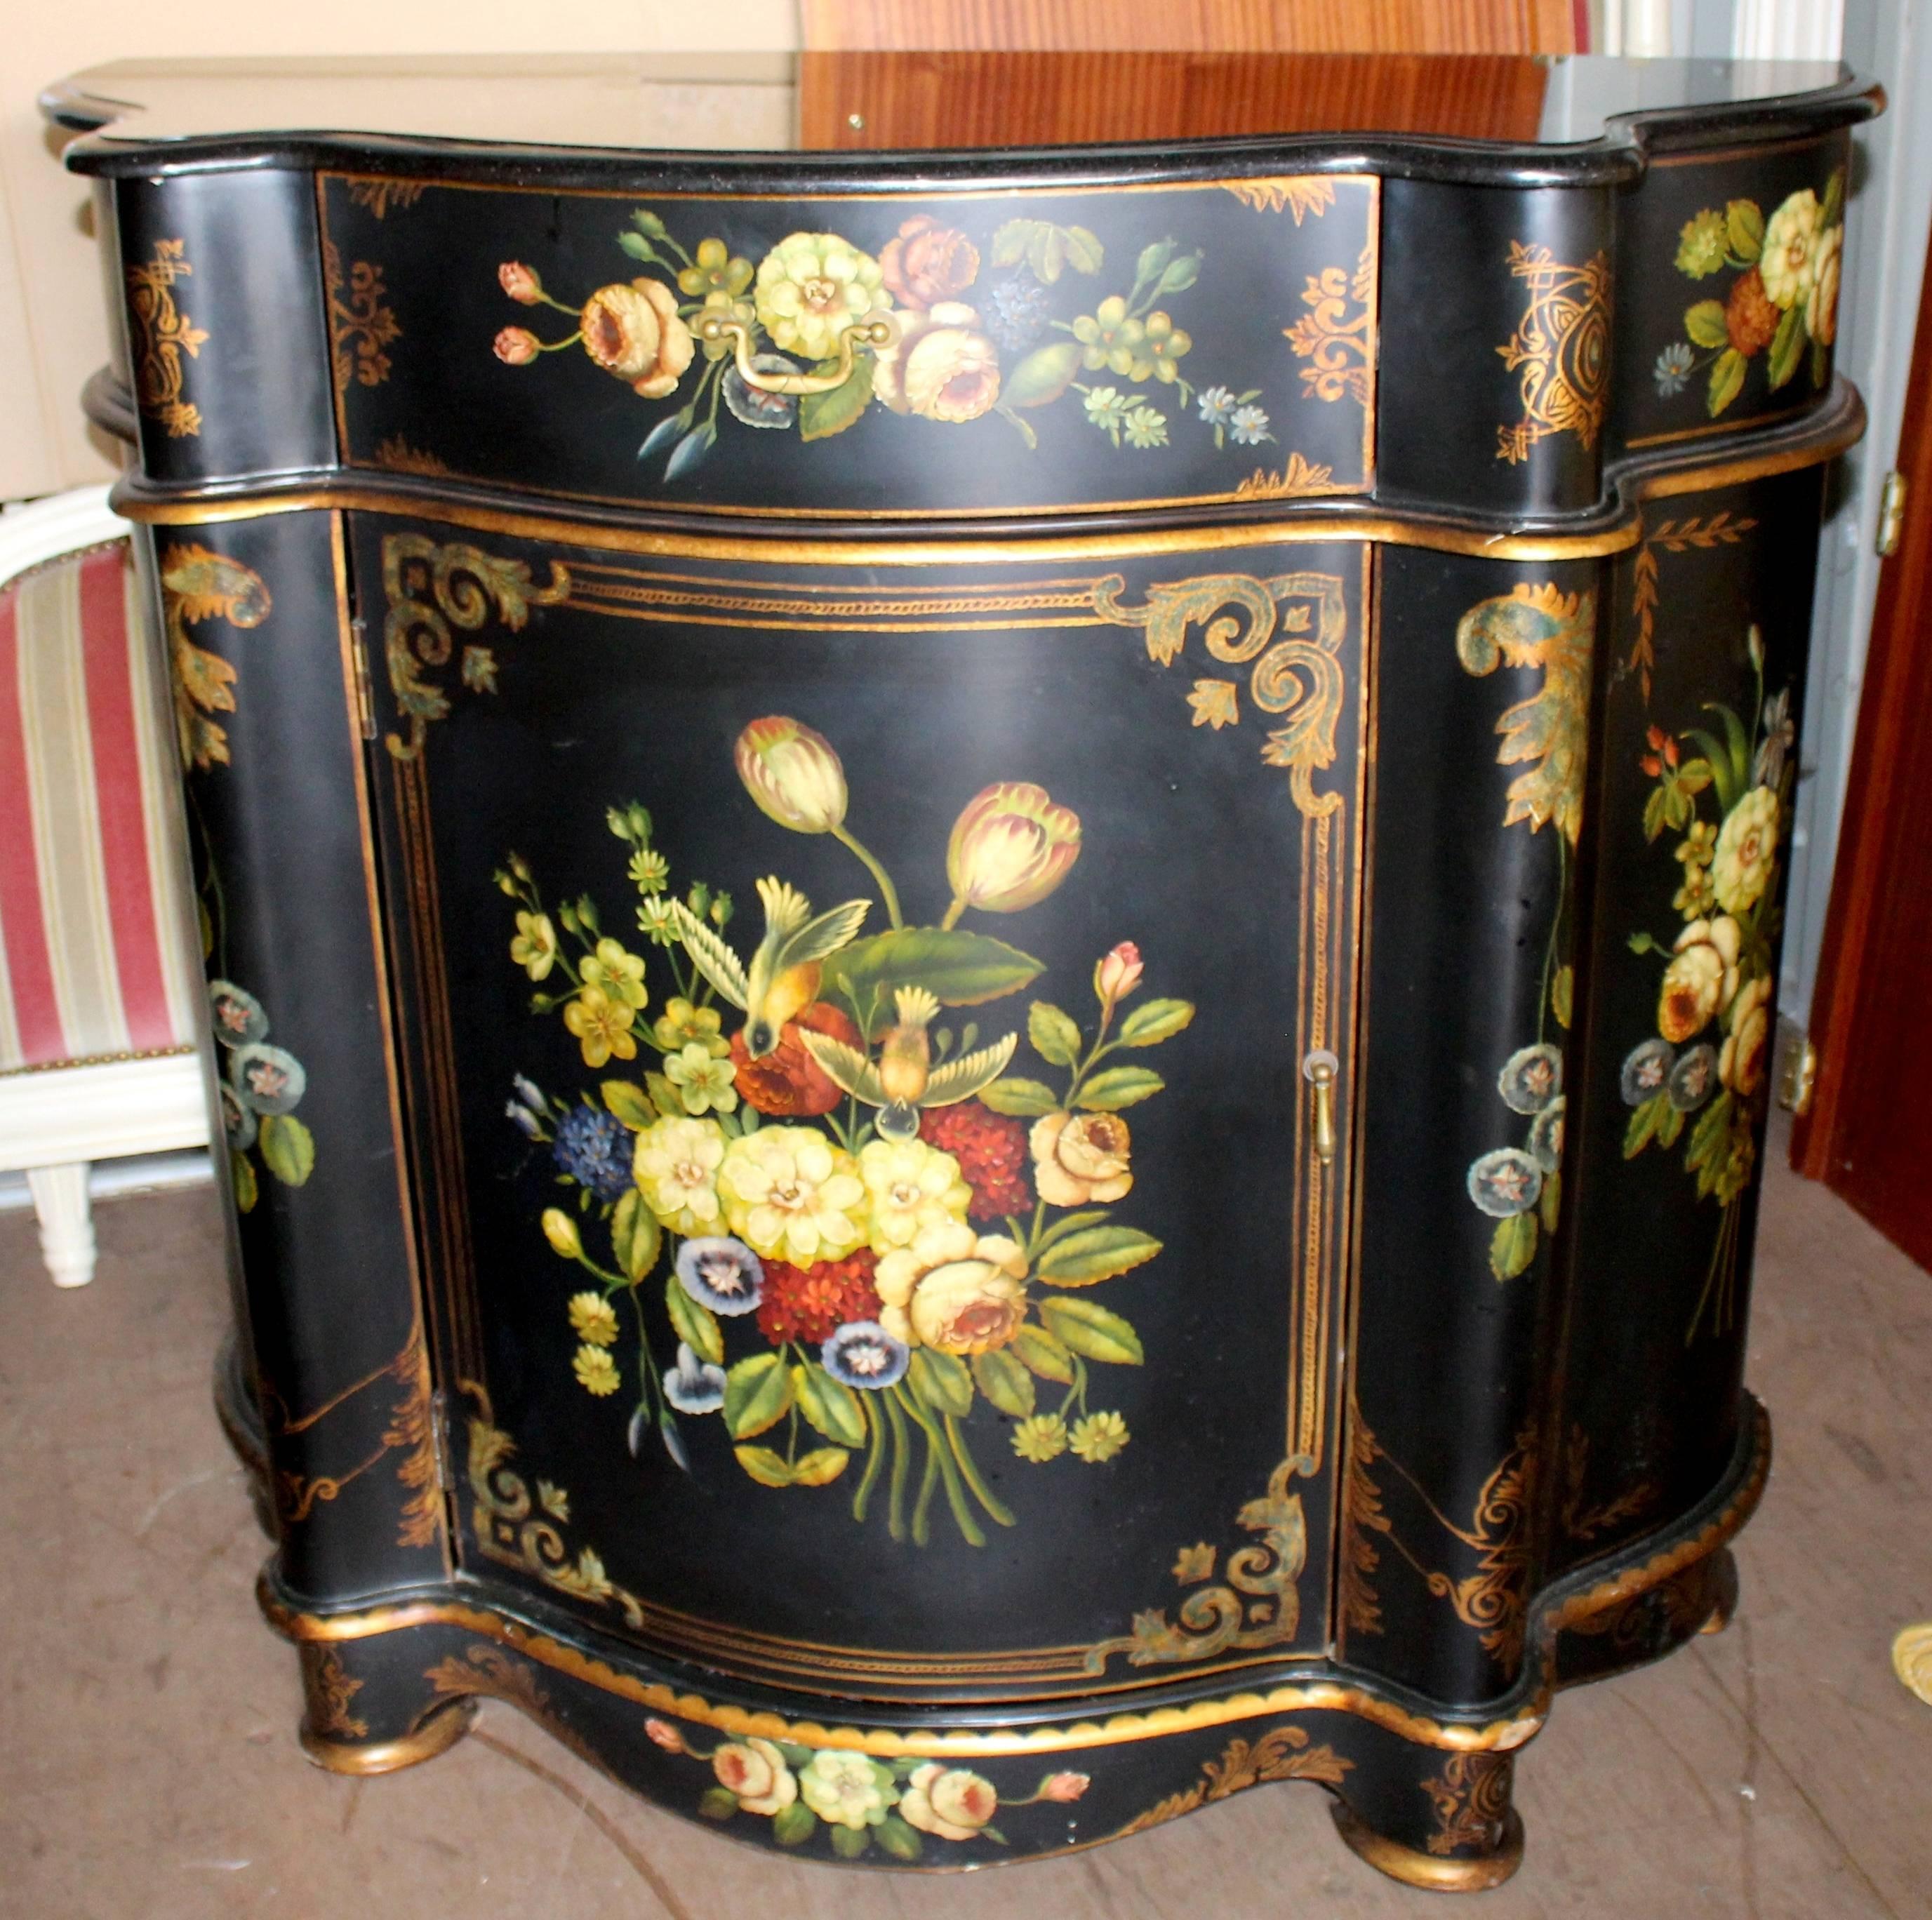 Measures: Width 109 cm 43 in
Depth 45 cm 17 3/4 in
Height 103 cm 40 1/2 in




Period 20th century.
Wood black lacquered finish with hand-painted Dutch style motifs and gilded detail
Condition Very good condition. One or two small marks to